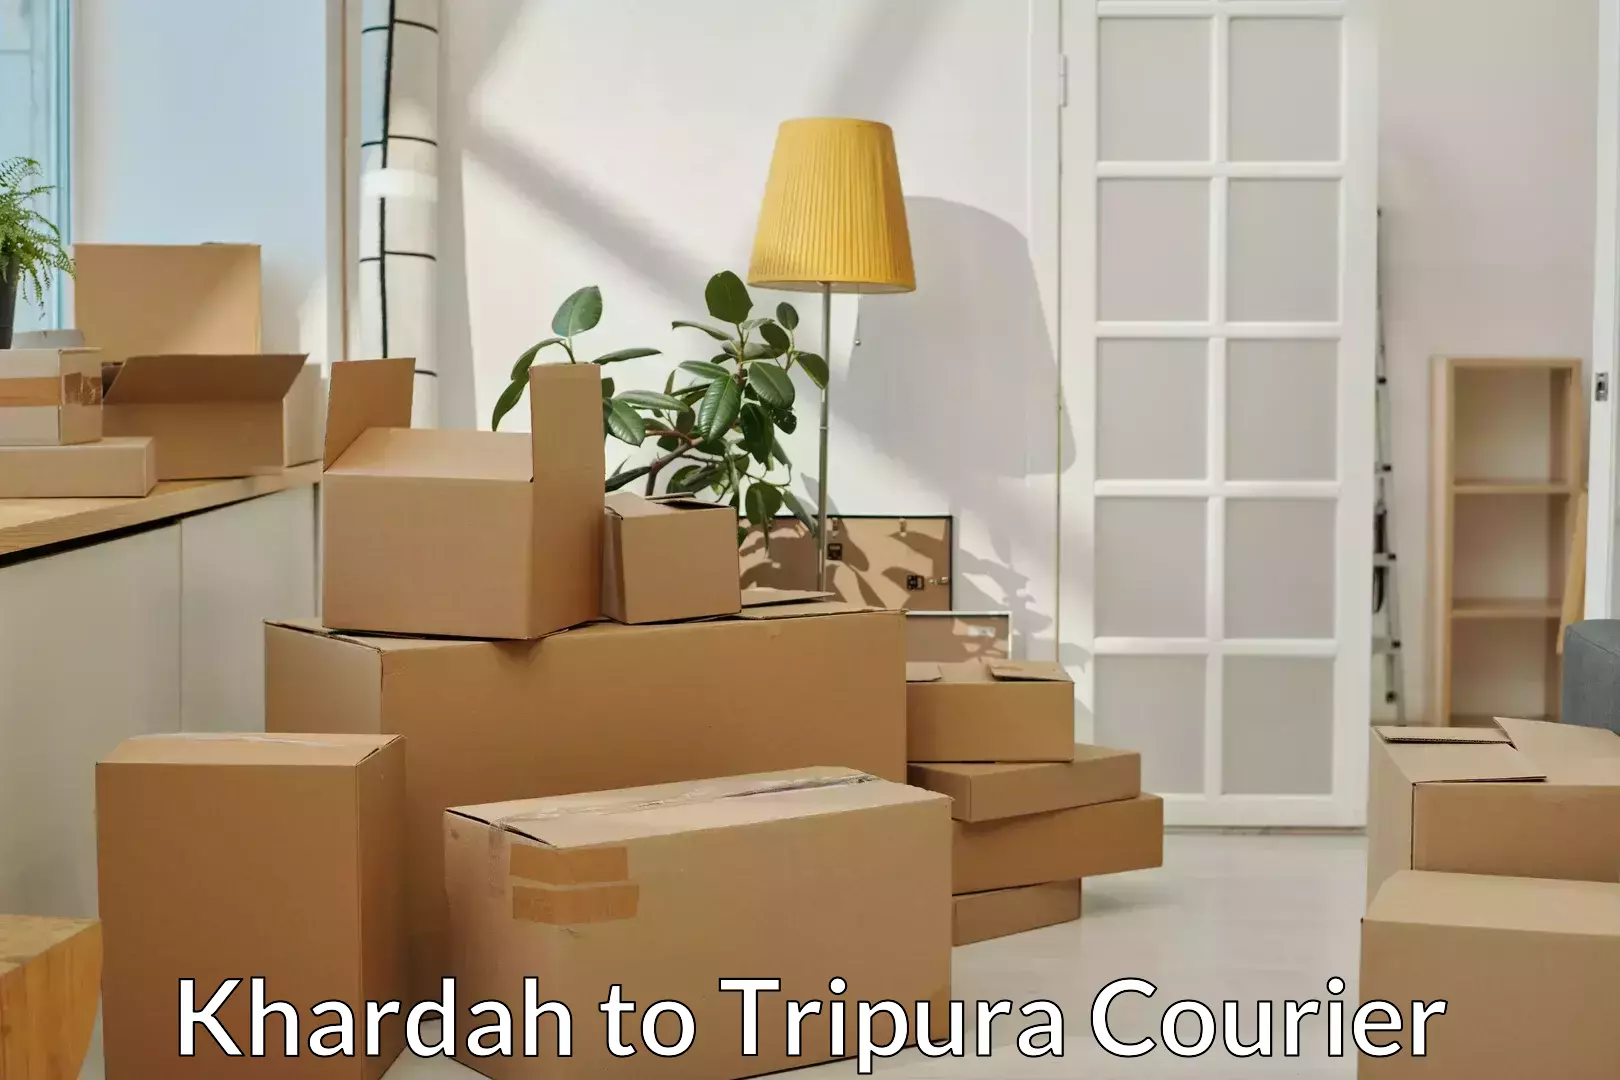 Moving and packing experts Khardah to Tripura